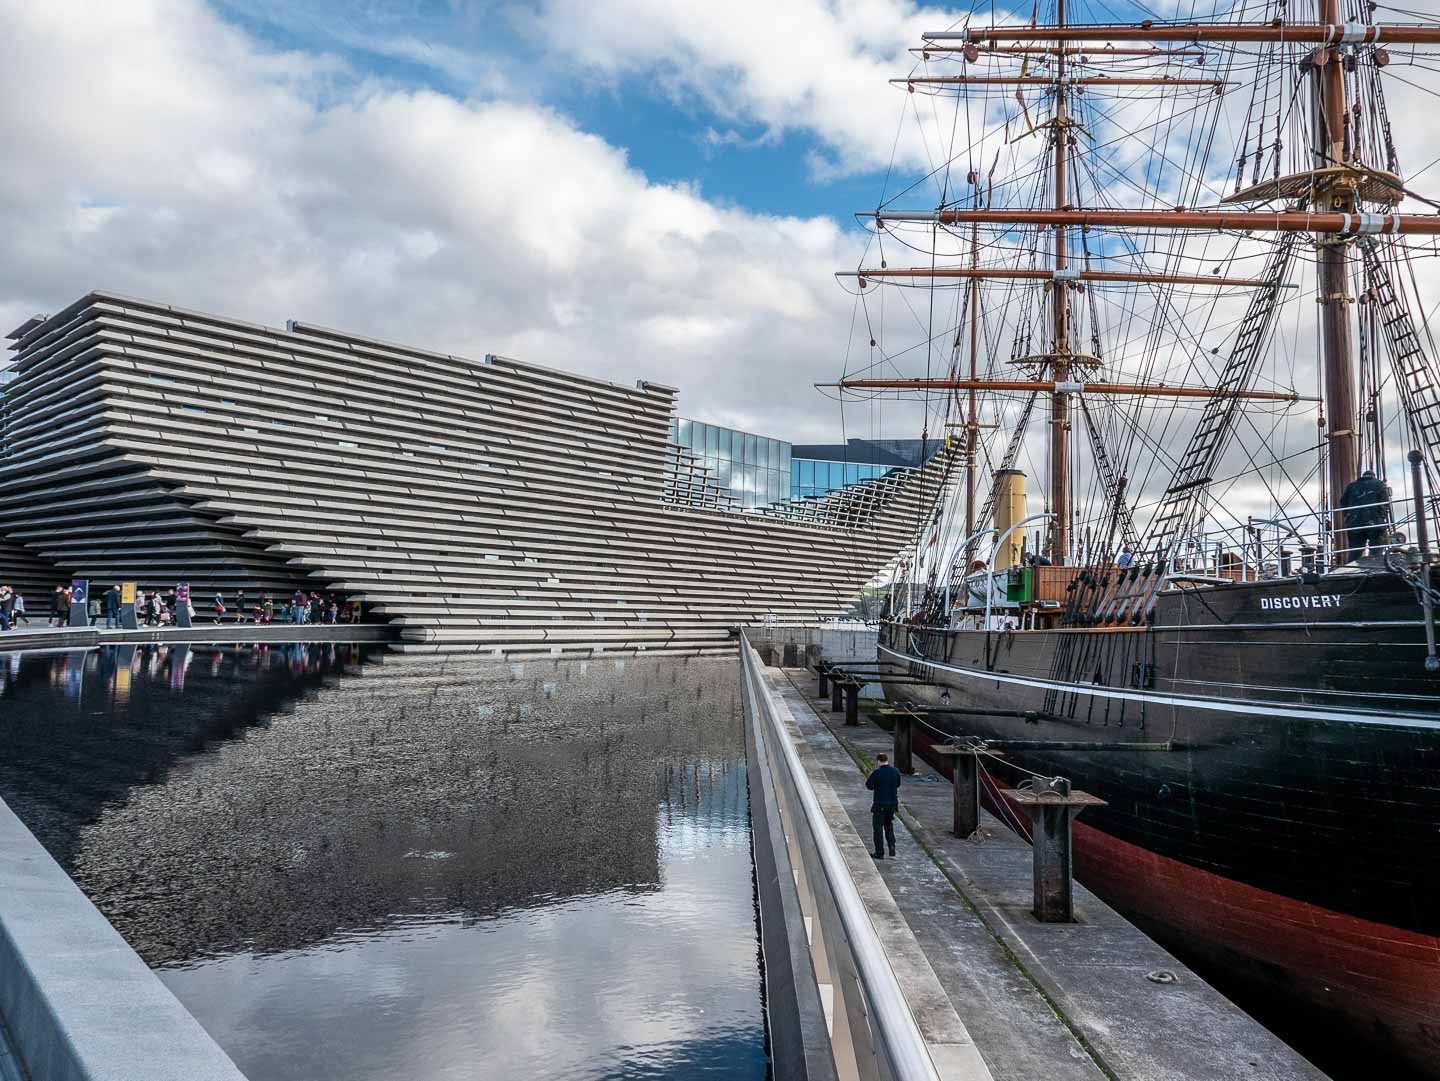 The new V&A Dundee opened in September 2017